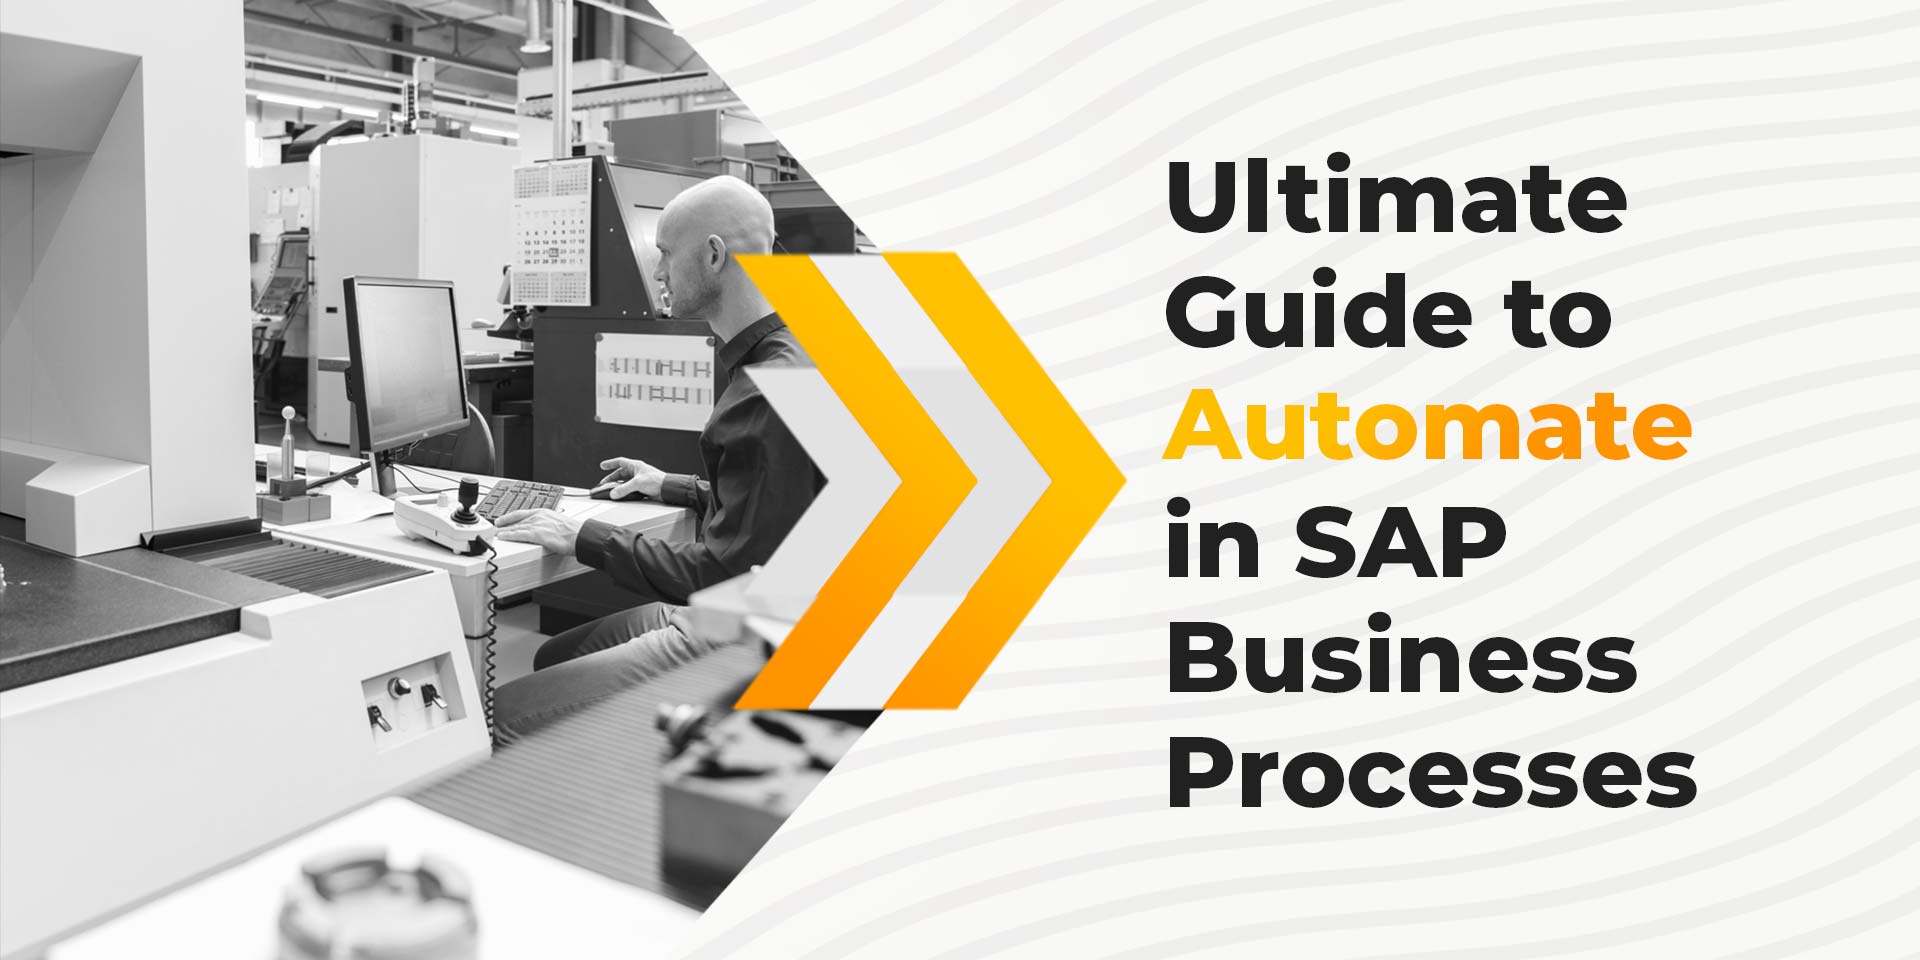 Ultimate Guide to Automation in SAP Business Processes- Top 20 Use Cases & Examples